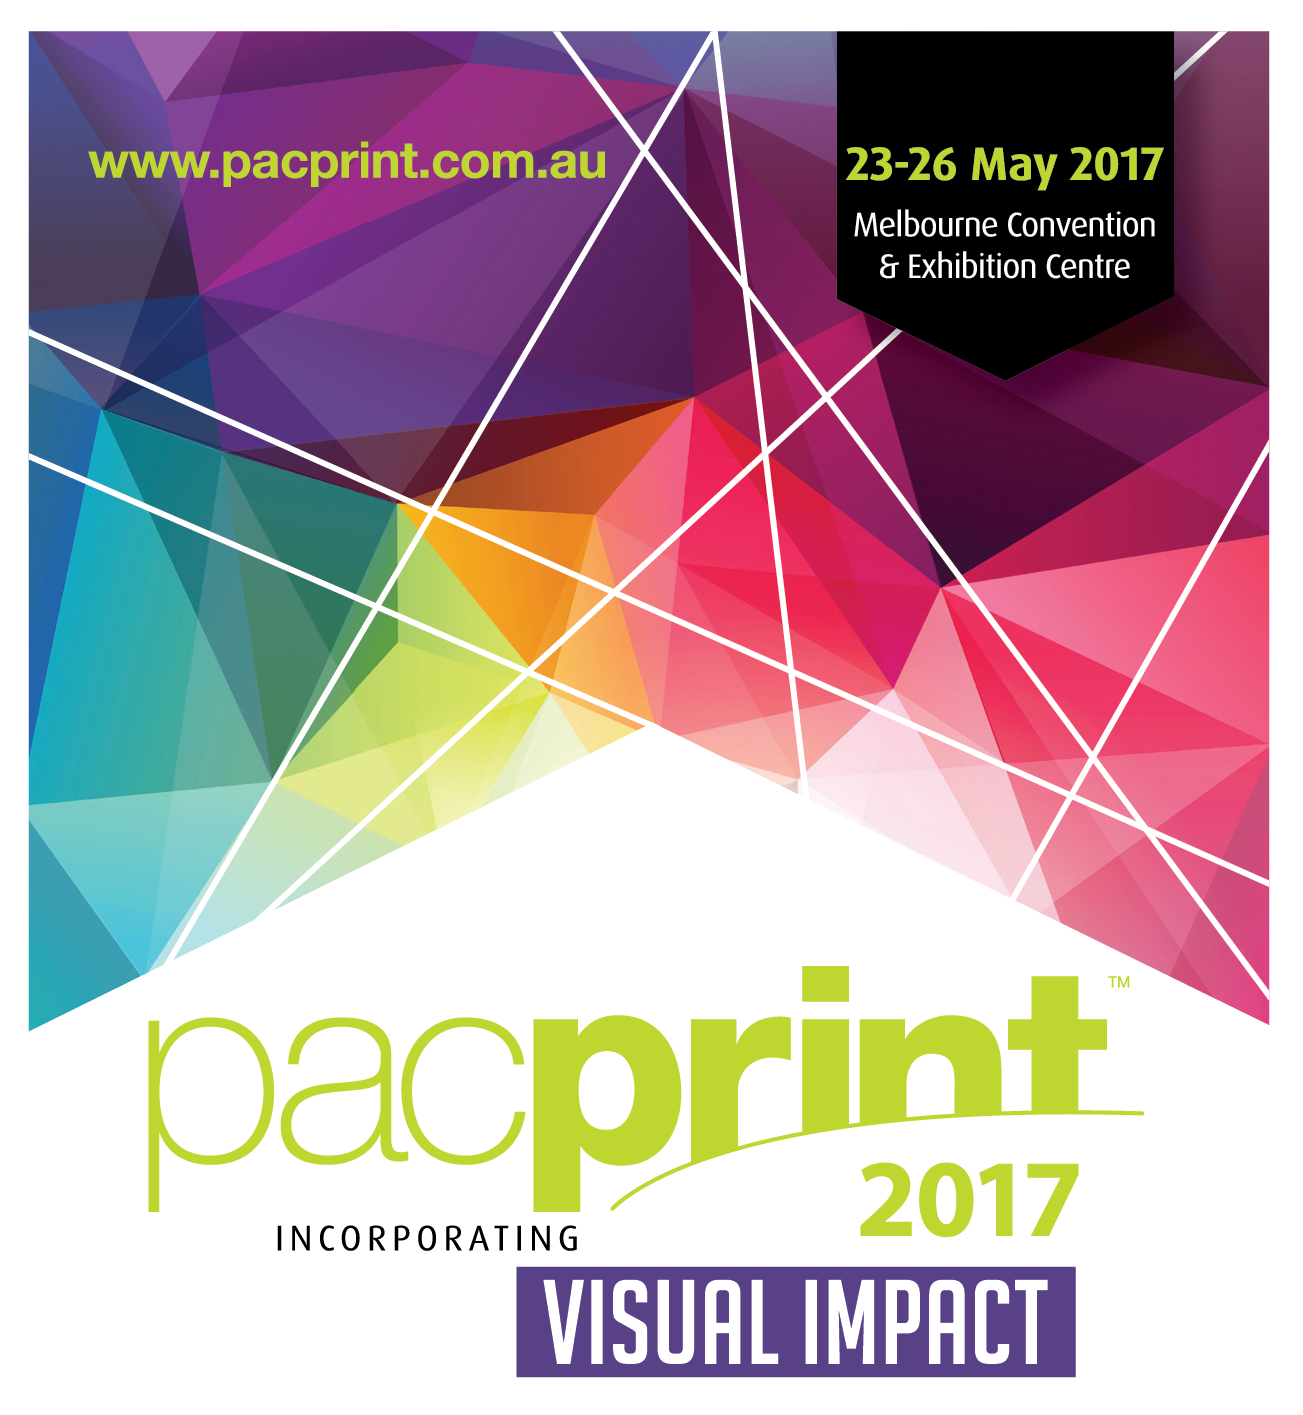 Pacprint Melbourne 23-26 May 2017